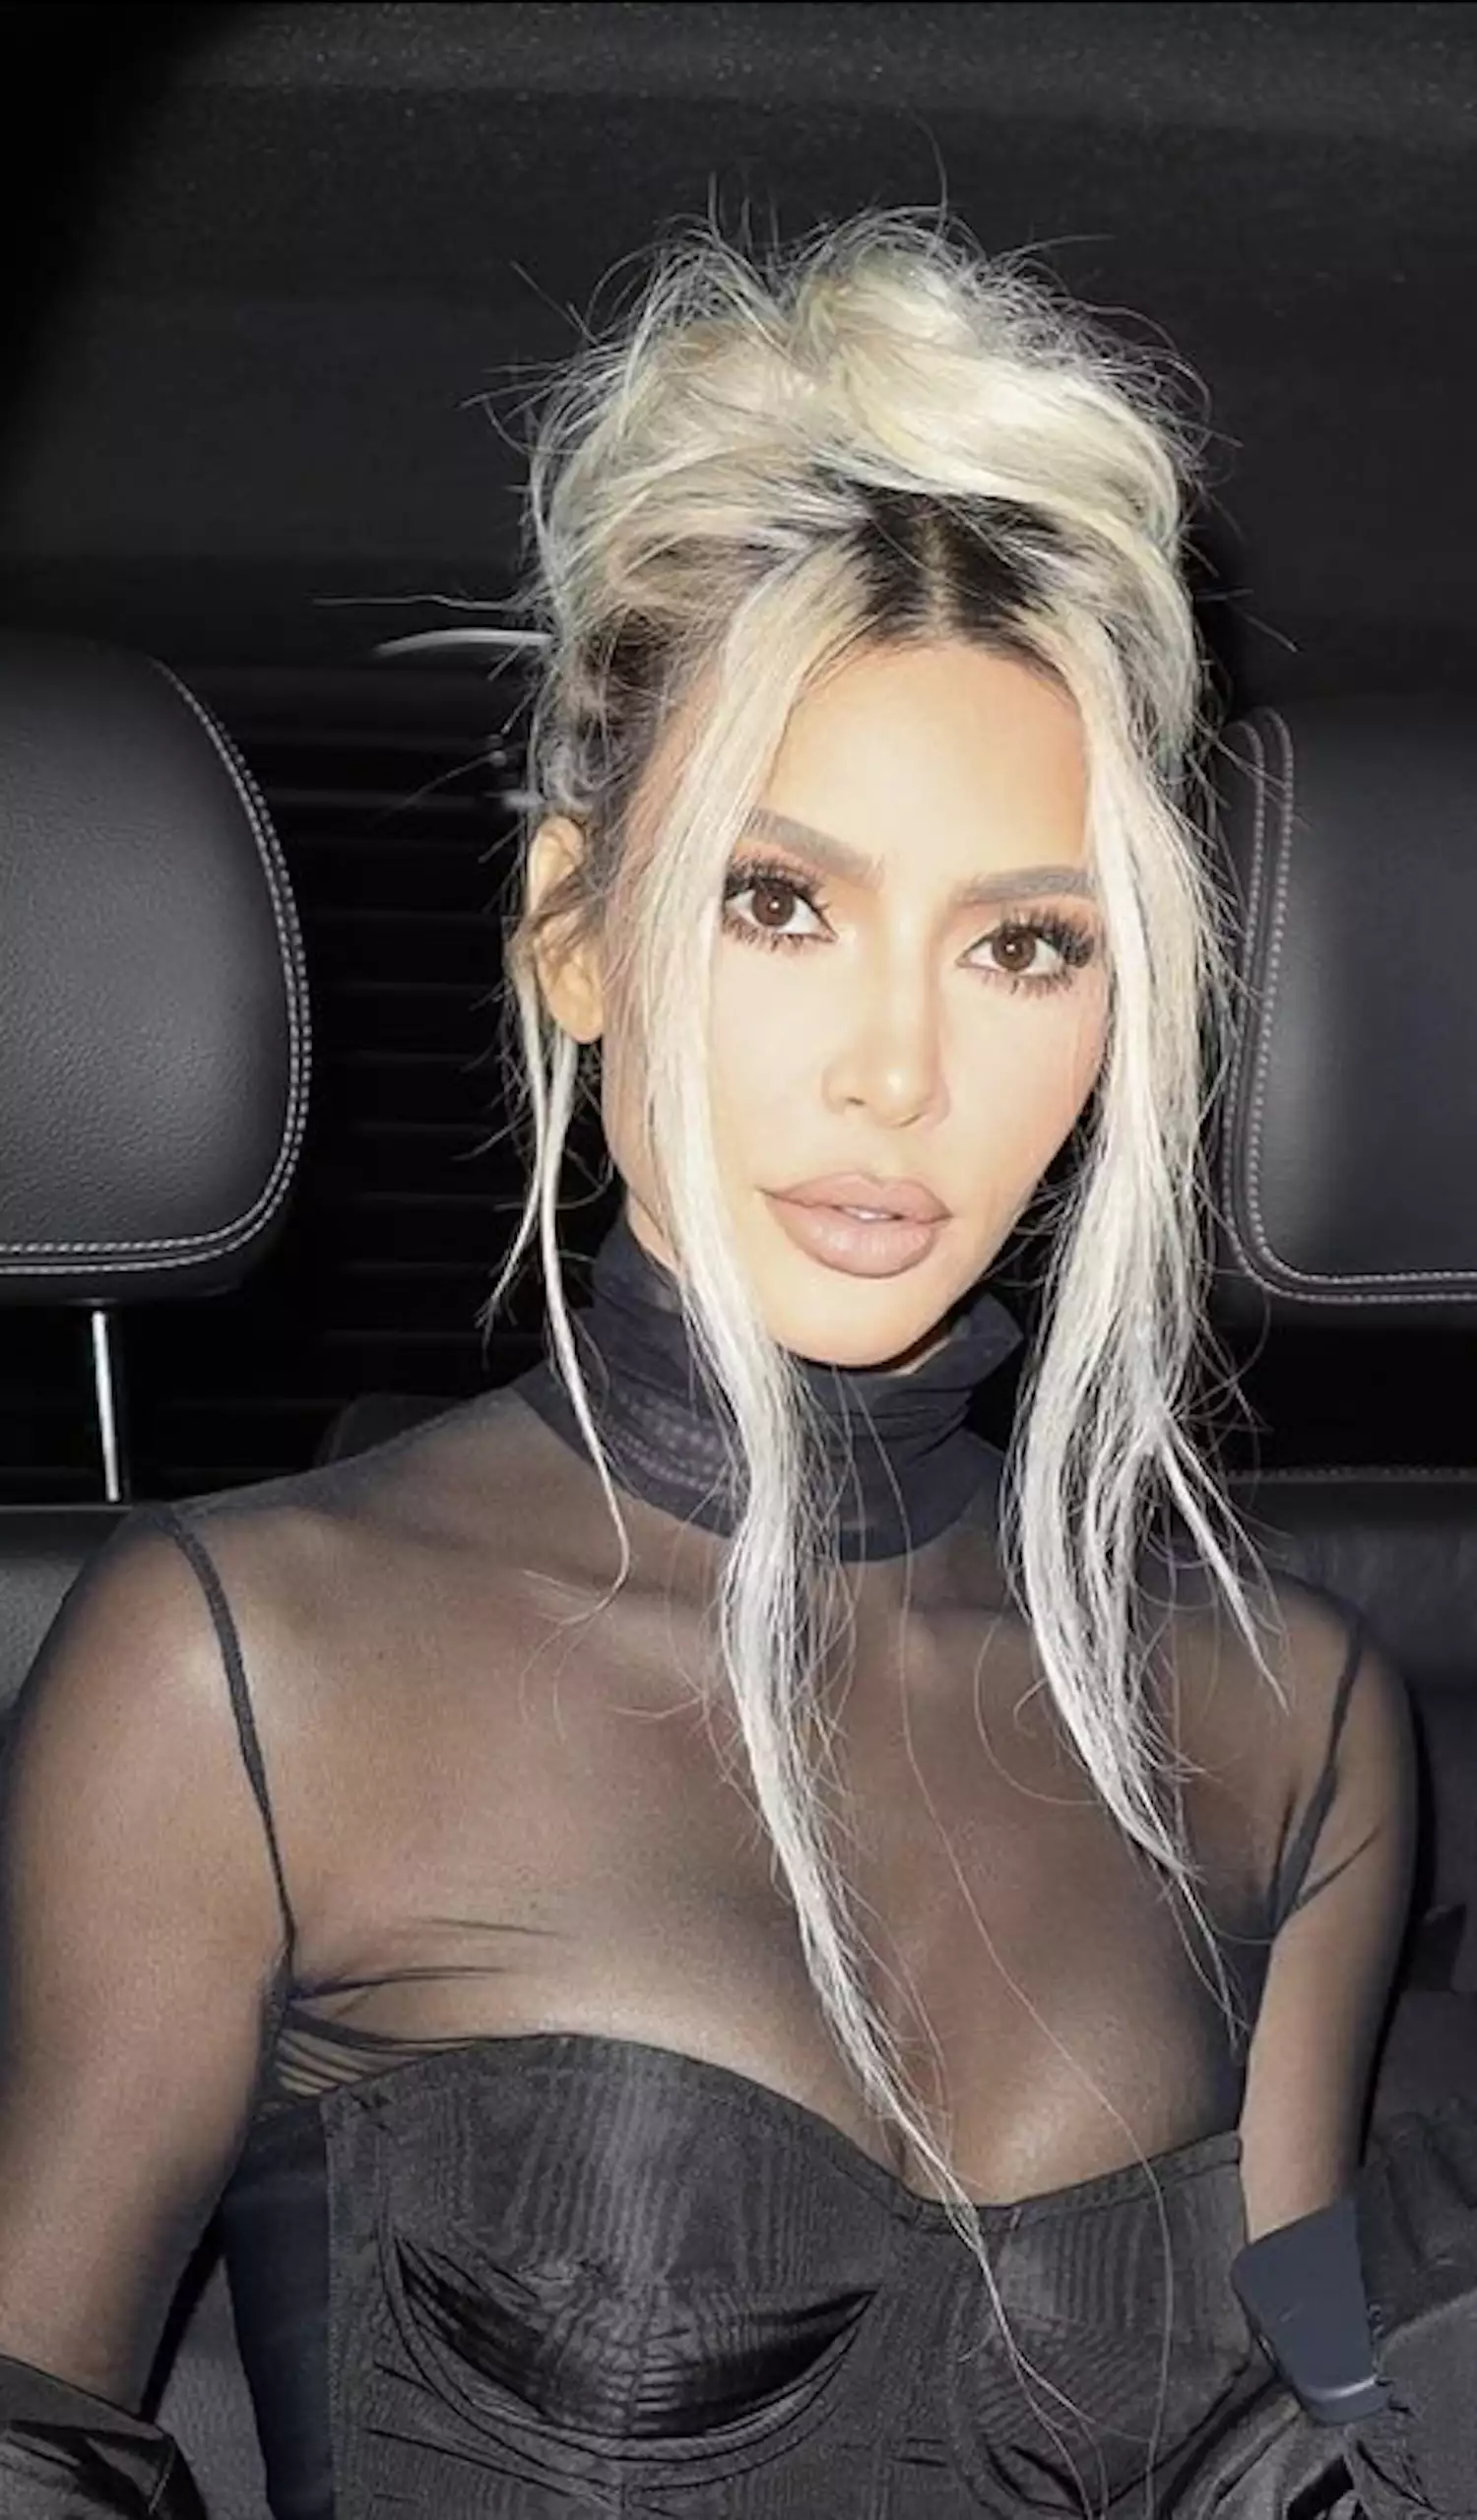 Kim Kardashian's Greatest Hair Moments: Loose and Textured Blonde Updo